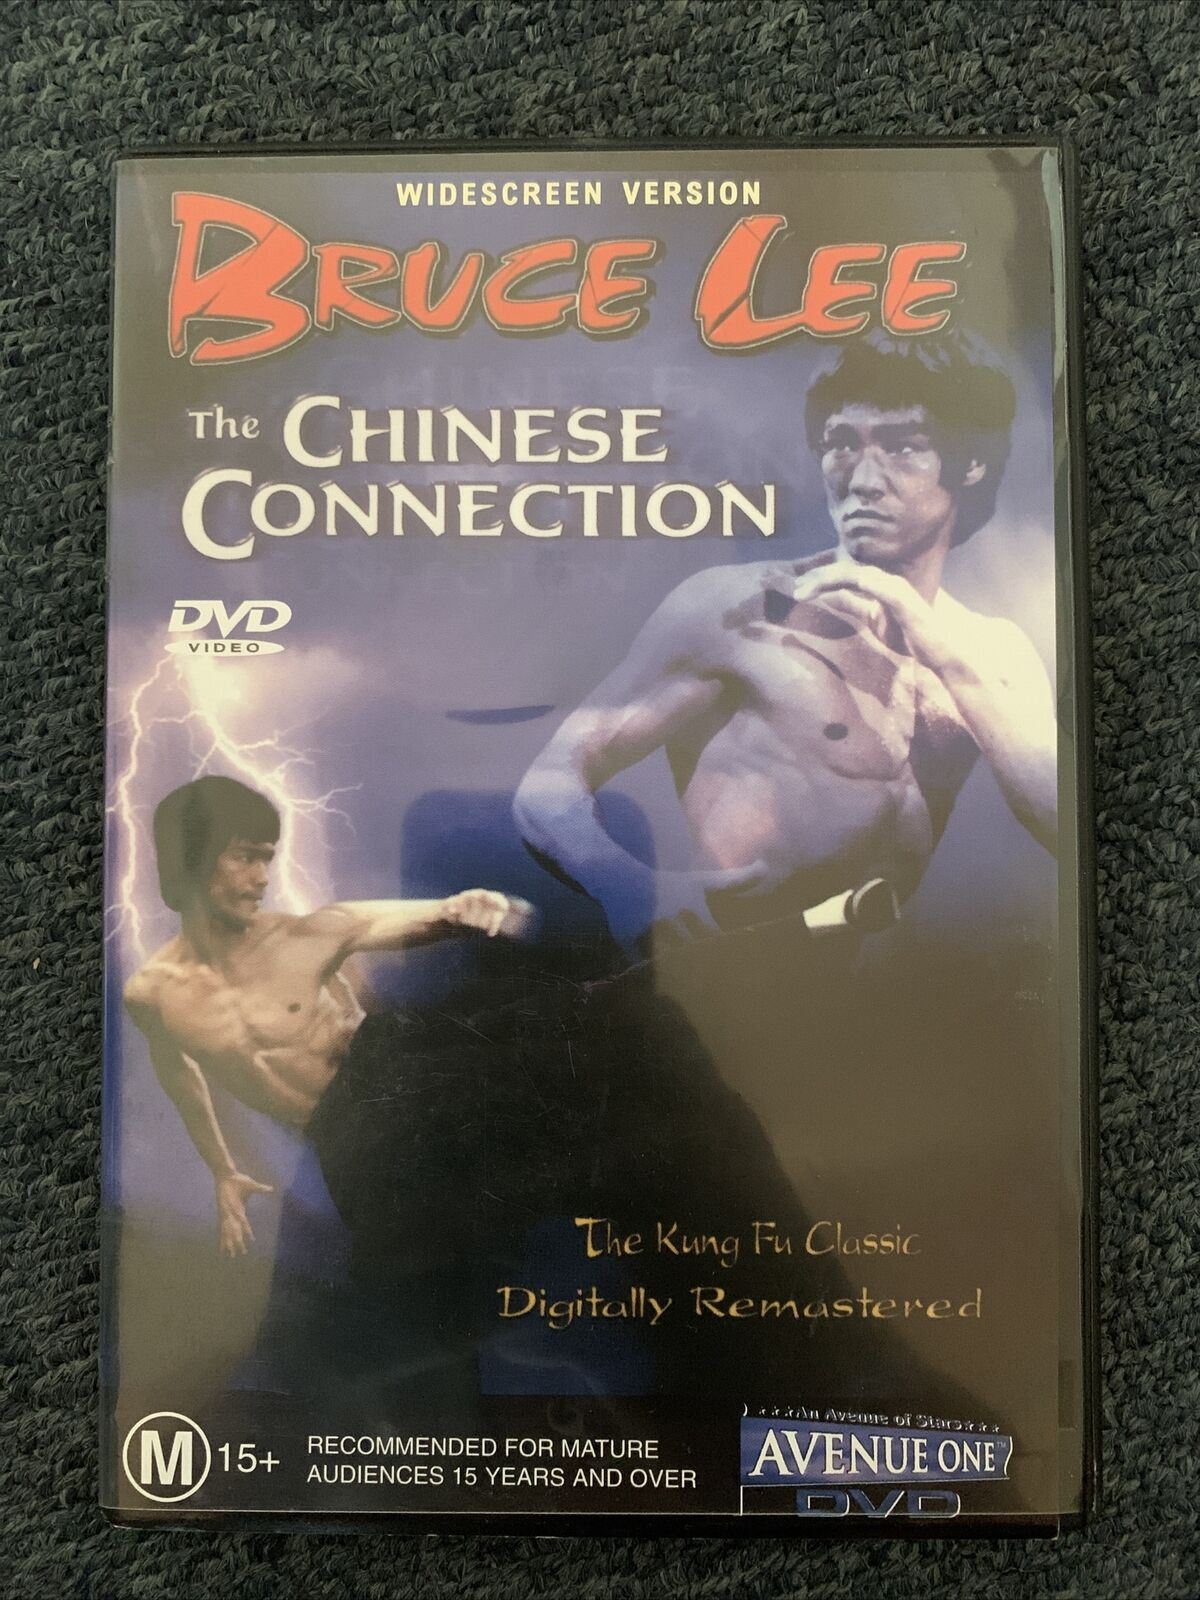 The Chinese Connection - Fist of Fury (DVD, 1987) Bruce Lee